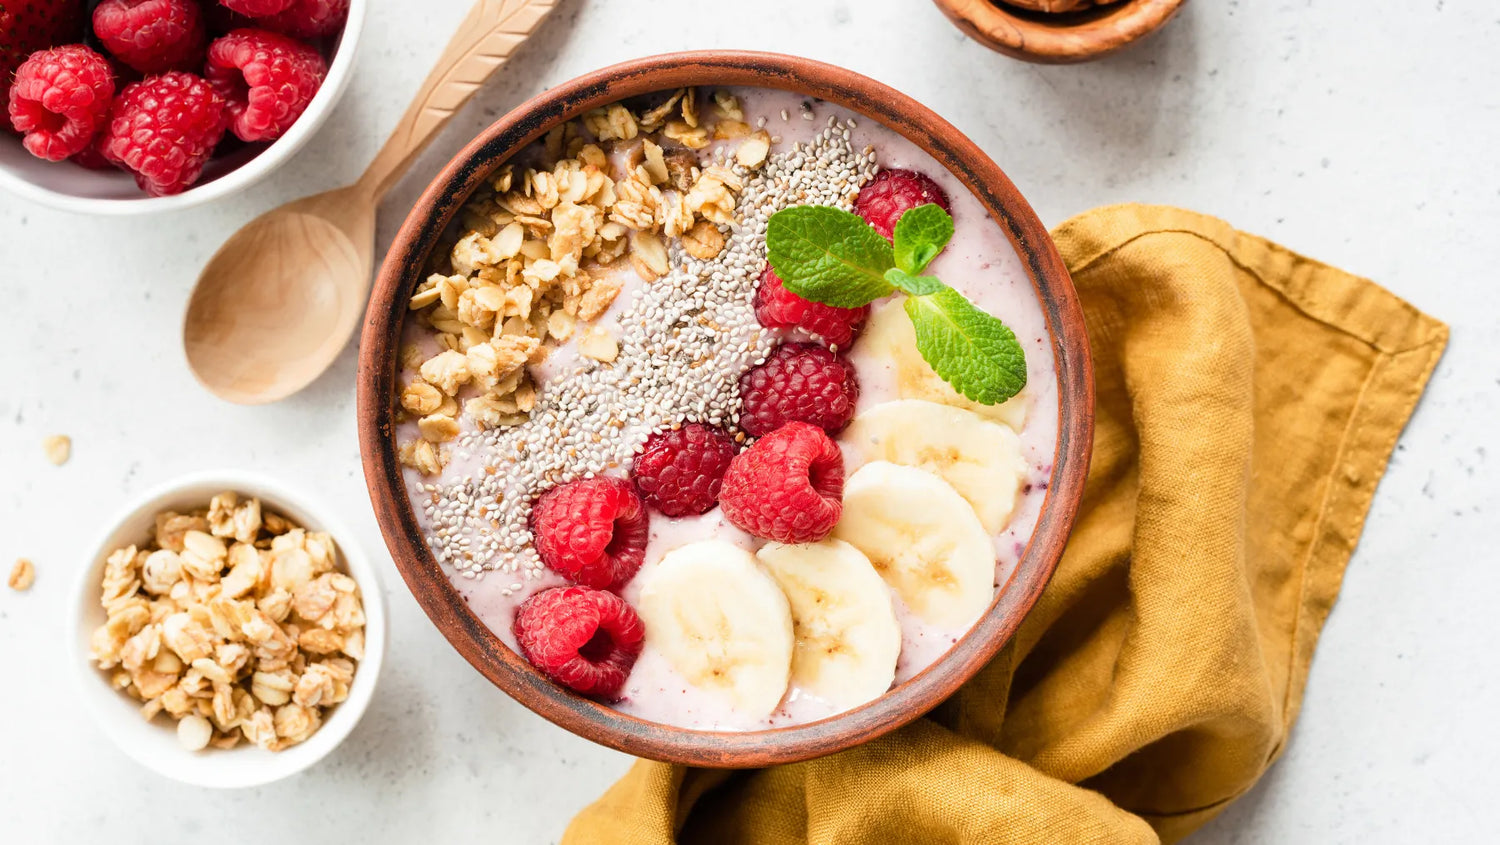 smoothie bowl toped with seeds, berries, bananas, and granola